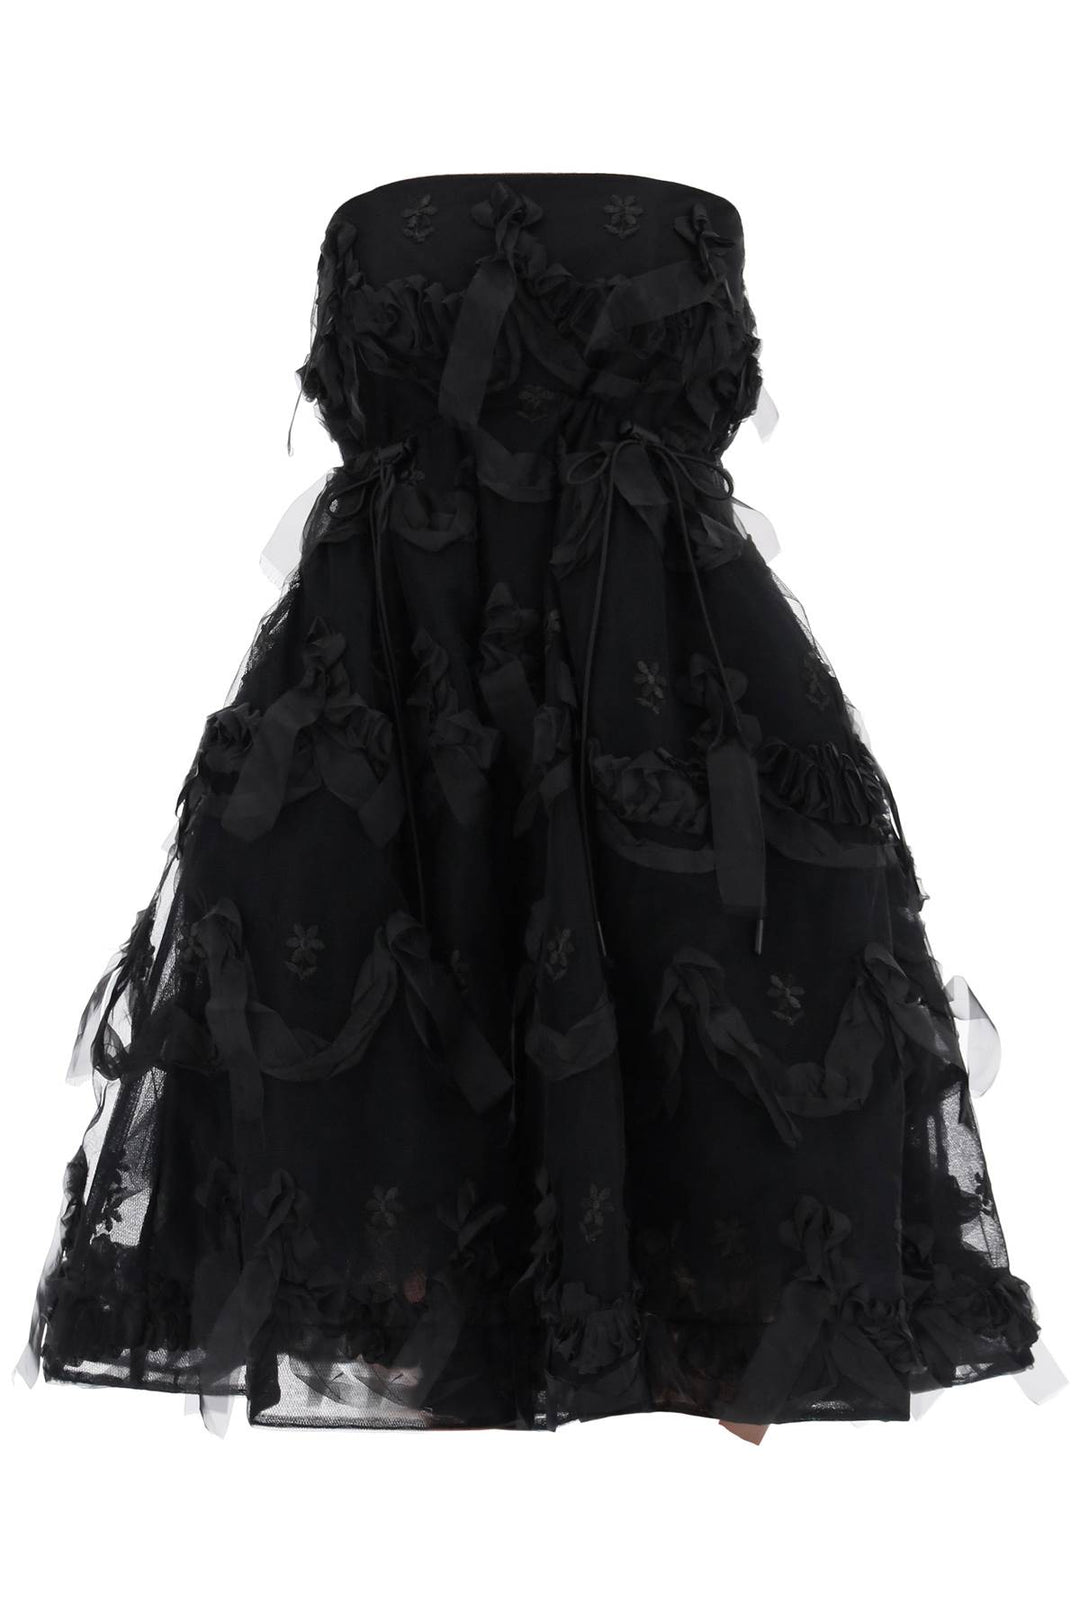 Simone Rocha Tulle Dress With Bows And Embroidery.   Nero